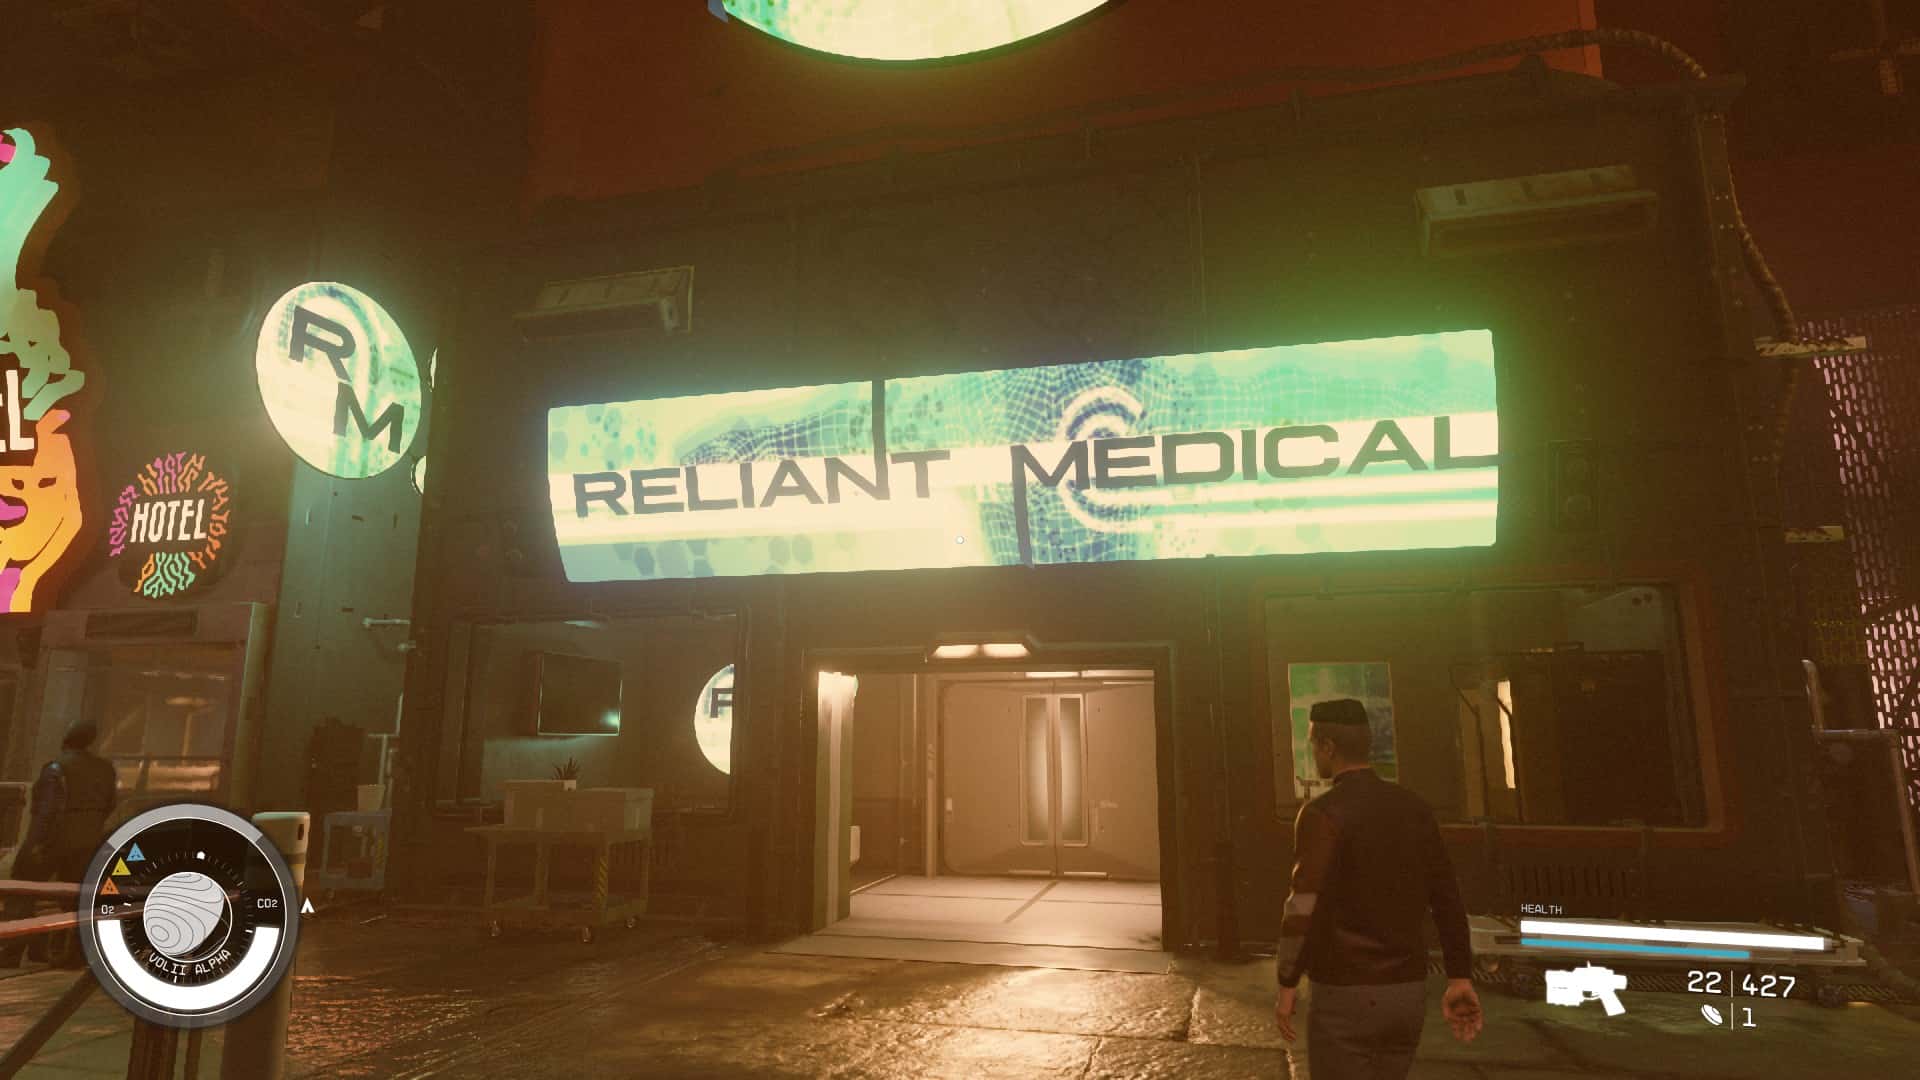 Starfield Neon shops: The outside of Reliant Medical in Neon.